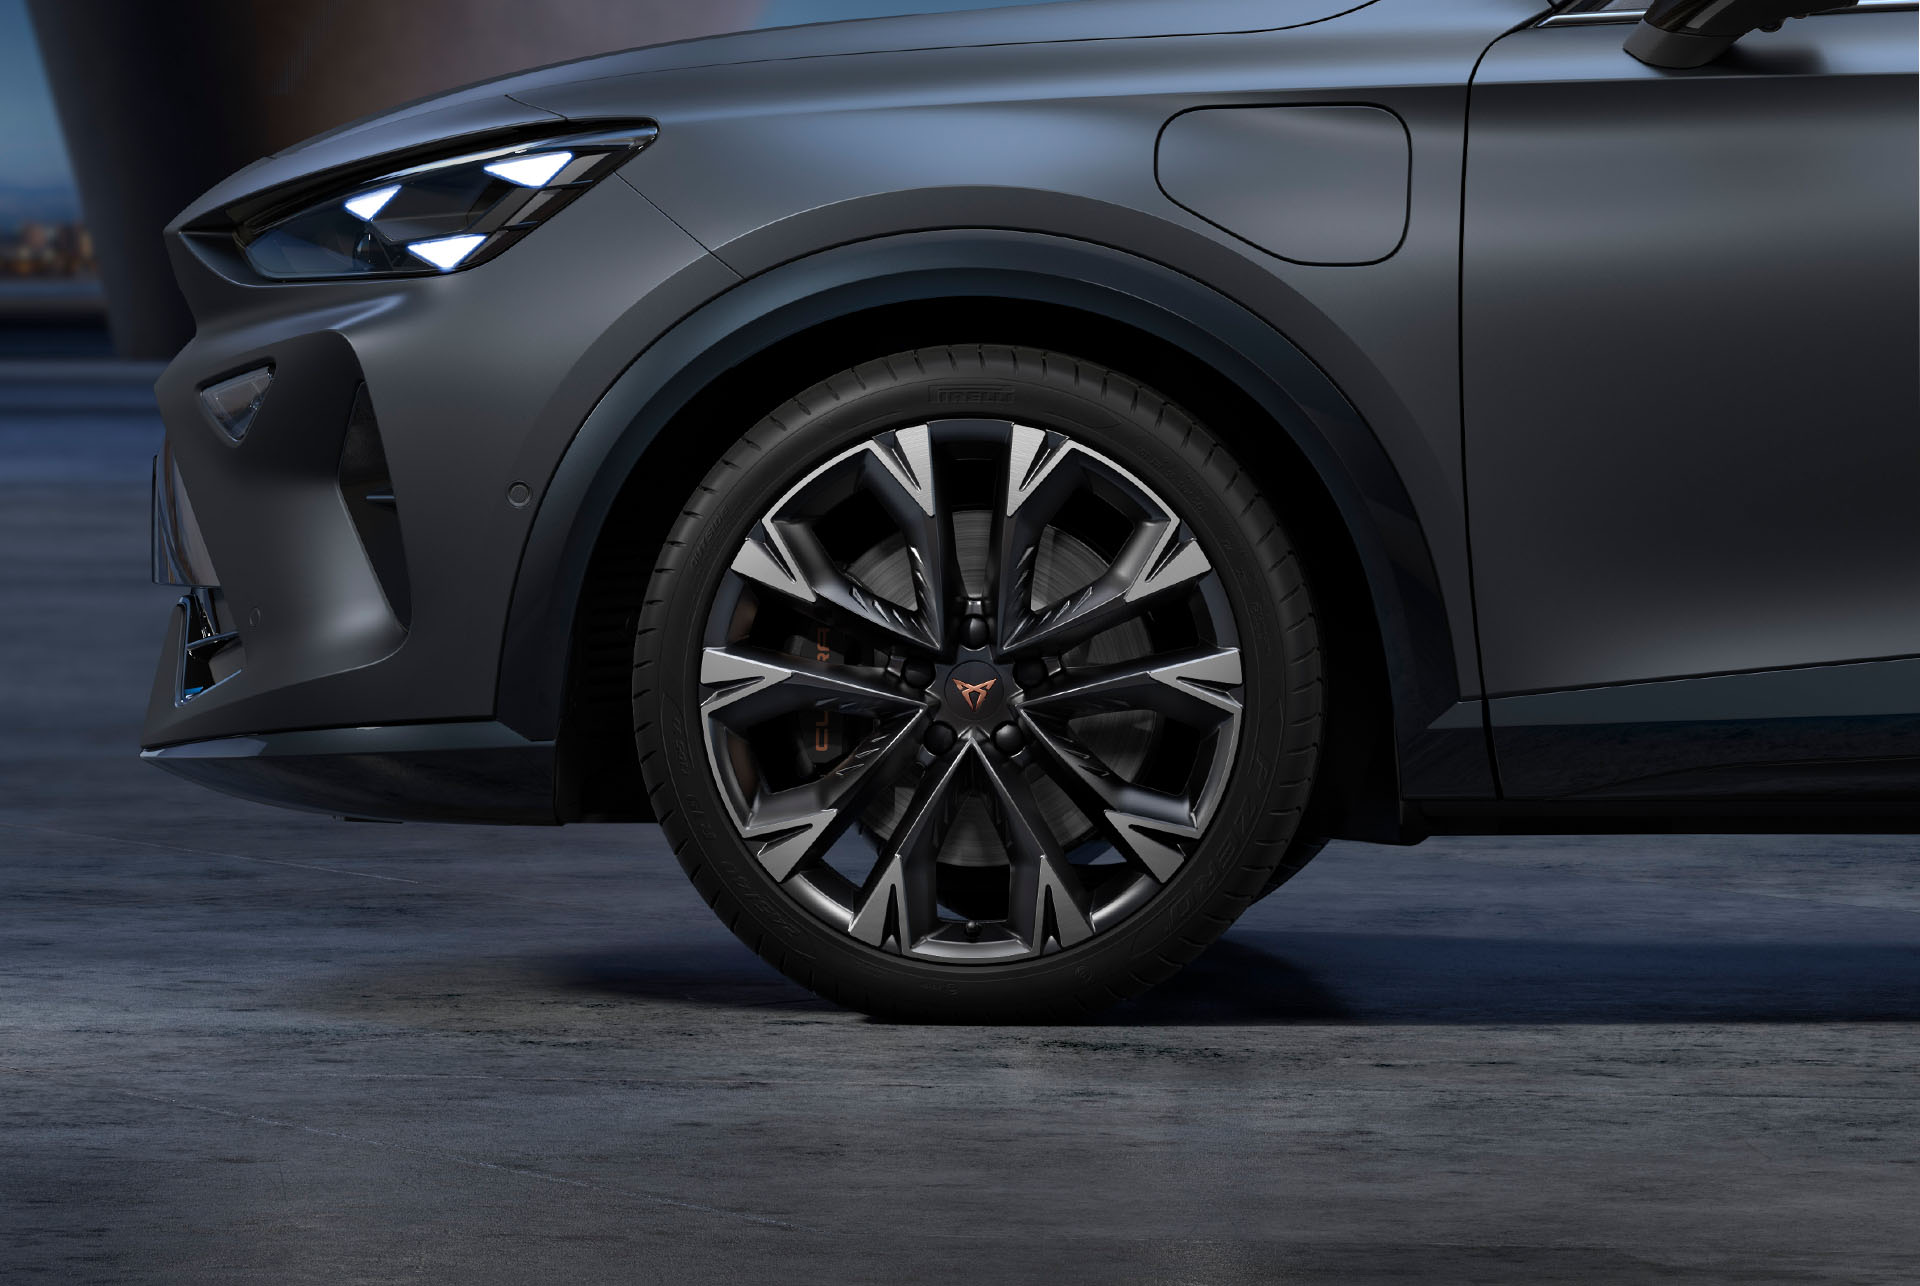 New artic silver and black CUPRA Formentor 2024 alloy car wheels, and tyres with logo in the middle, LED headlights.